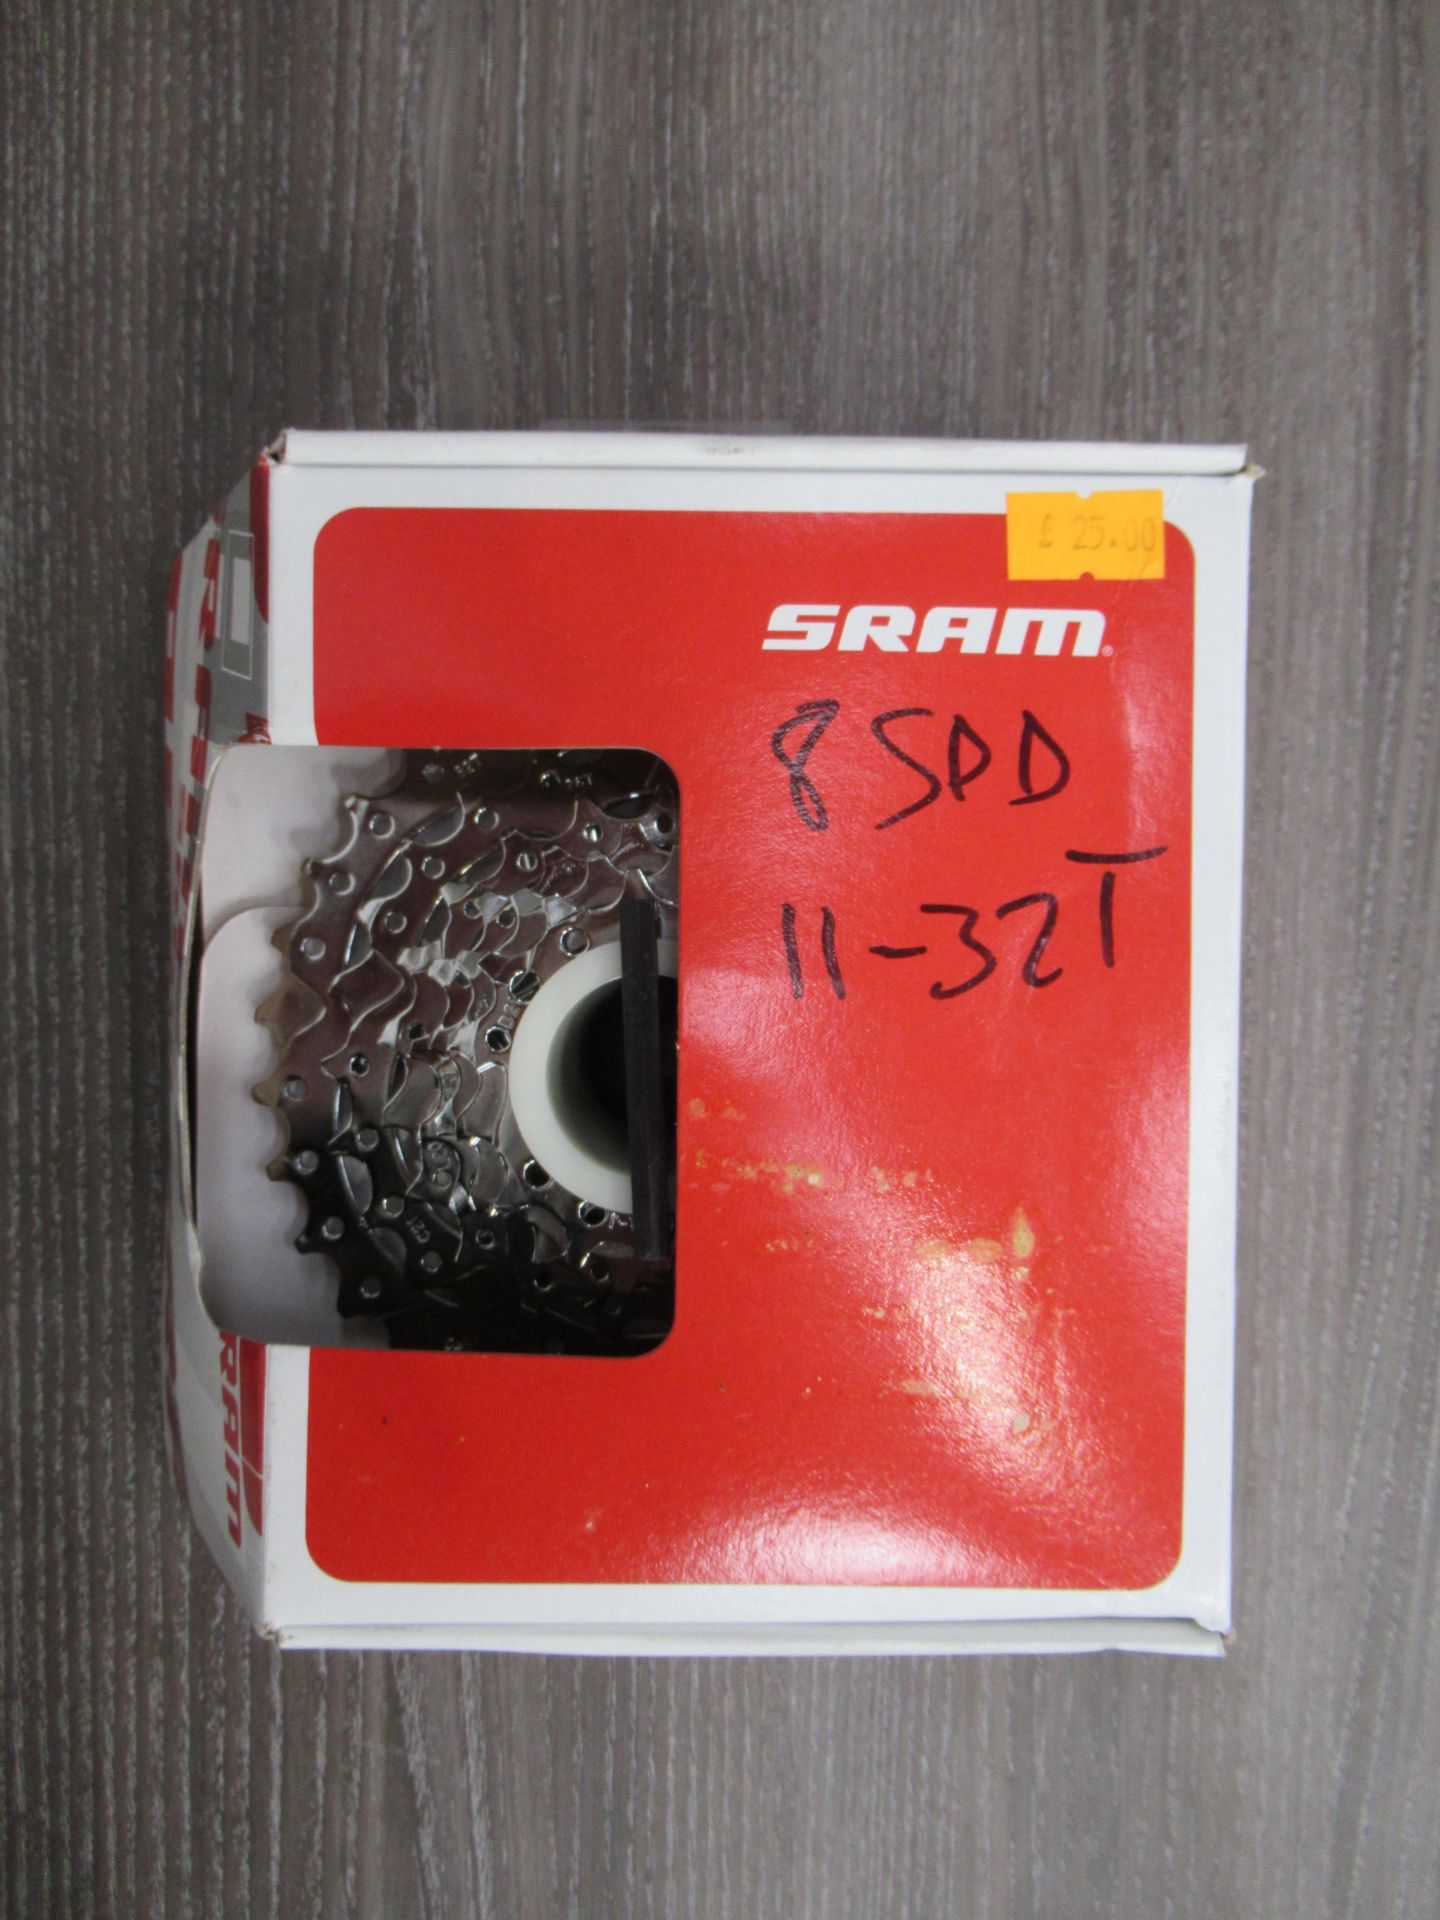 5 x 34/11T 8-SPD cassette from Shimano, SRAM and SunRace together with a 25/11T 9-SPD SunRace casset - Image 2 of 7